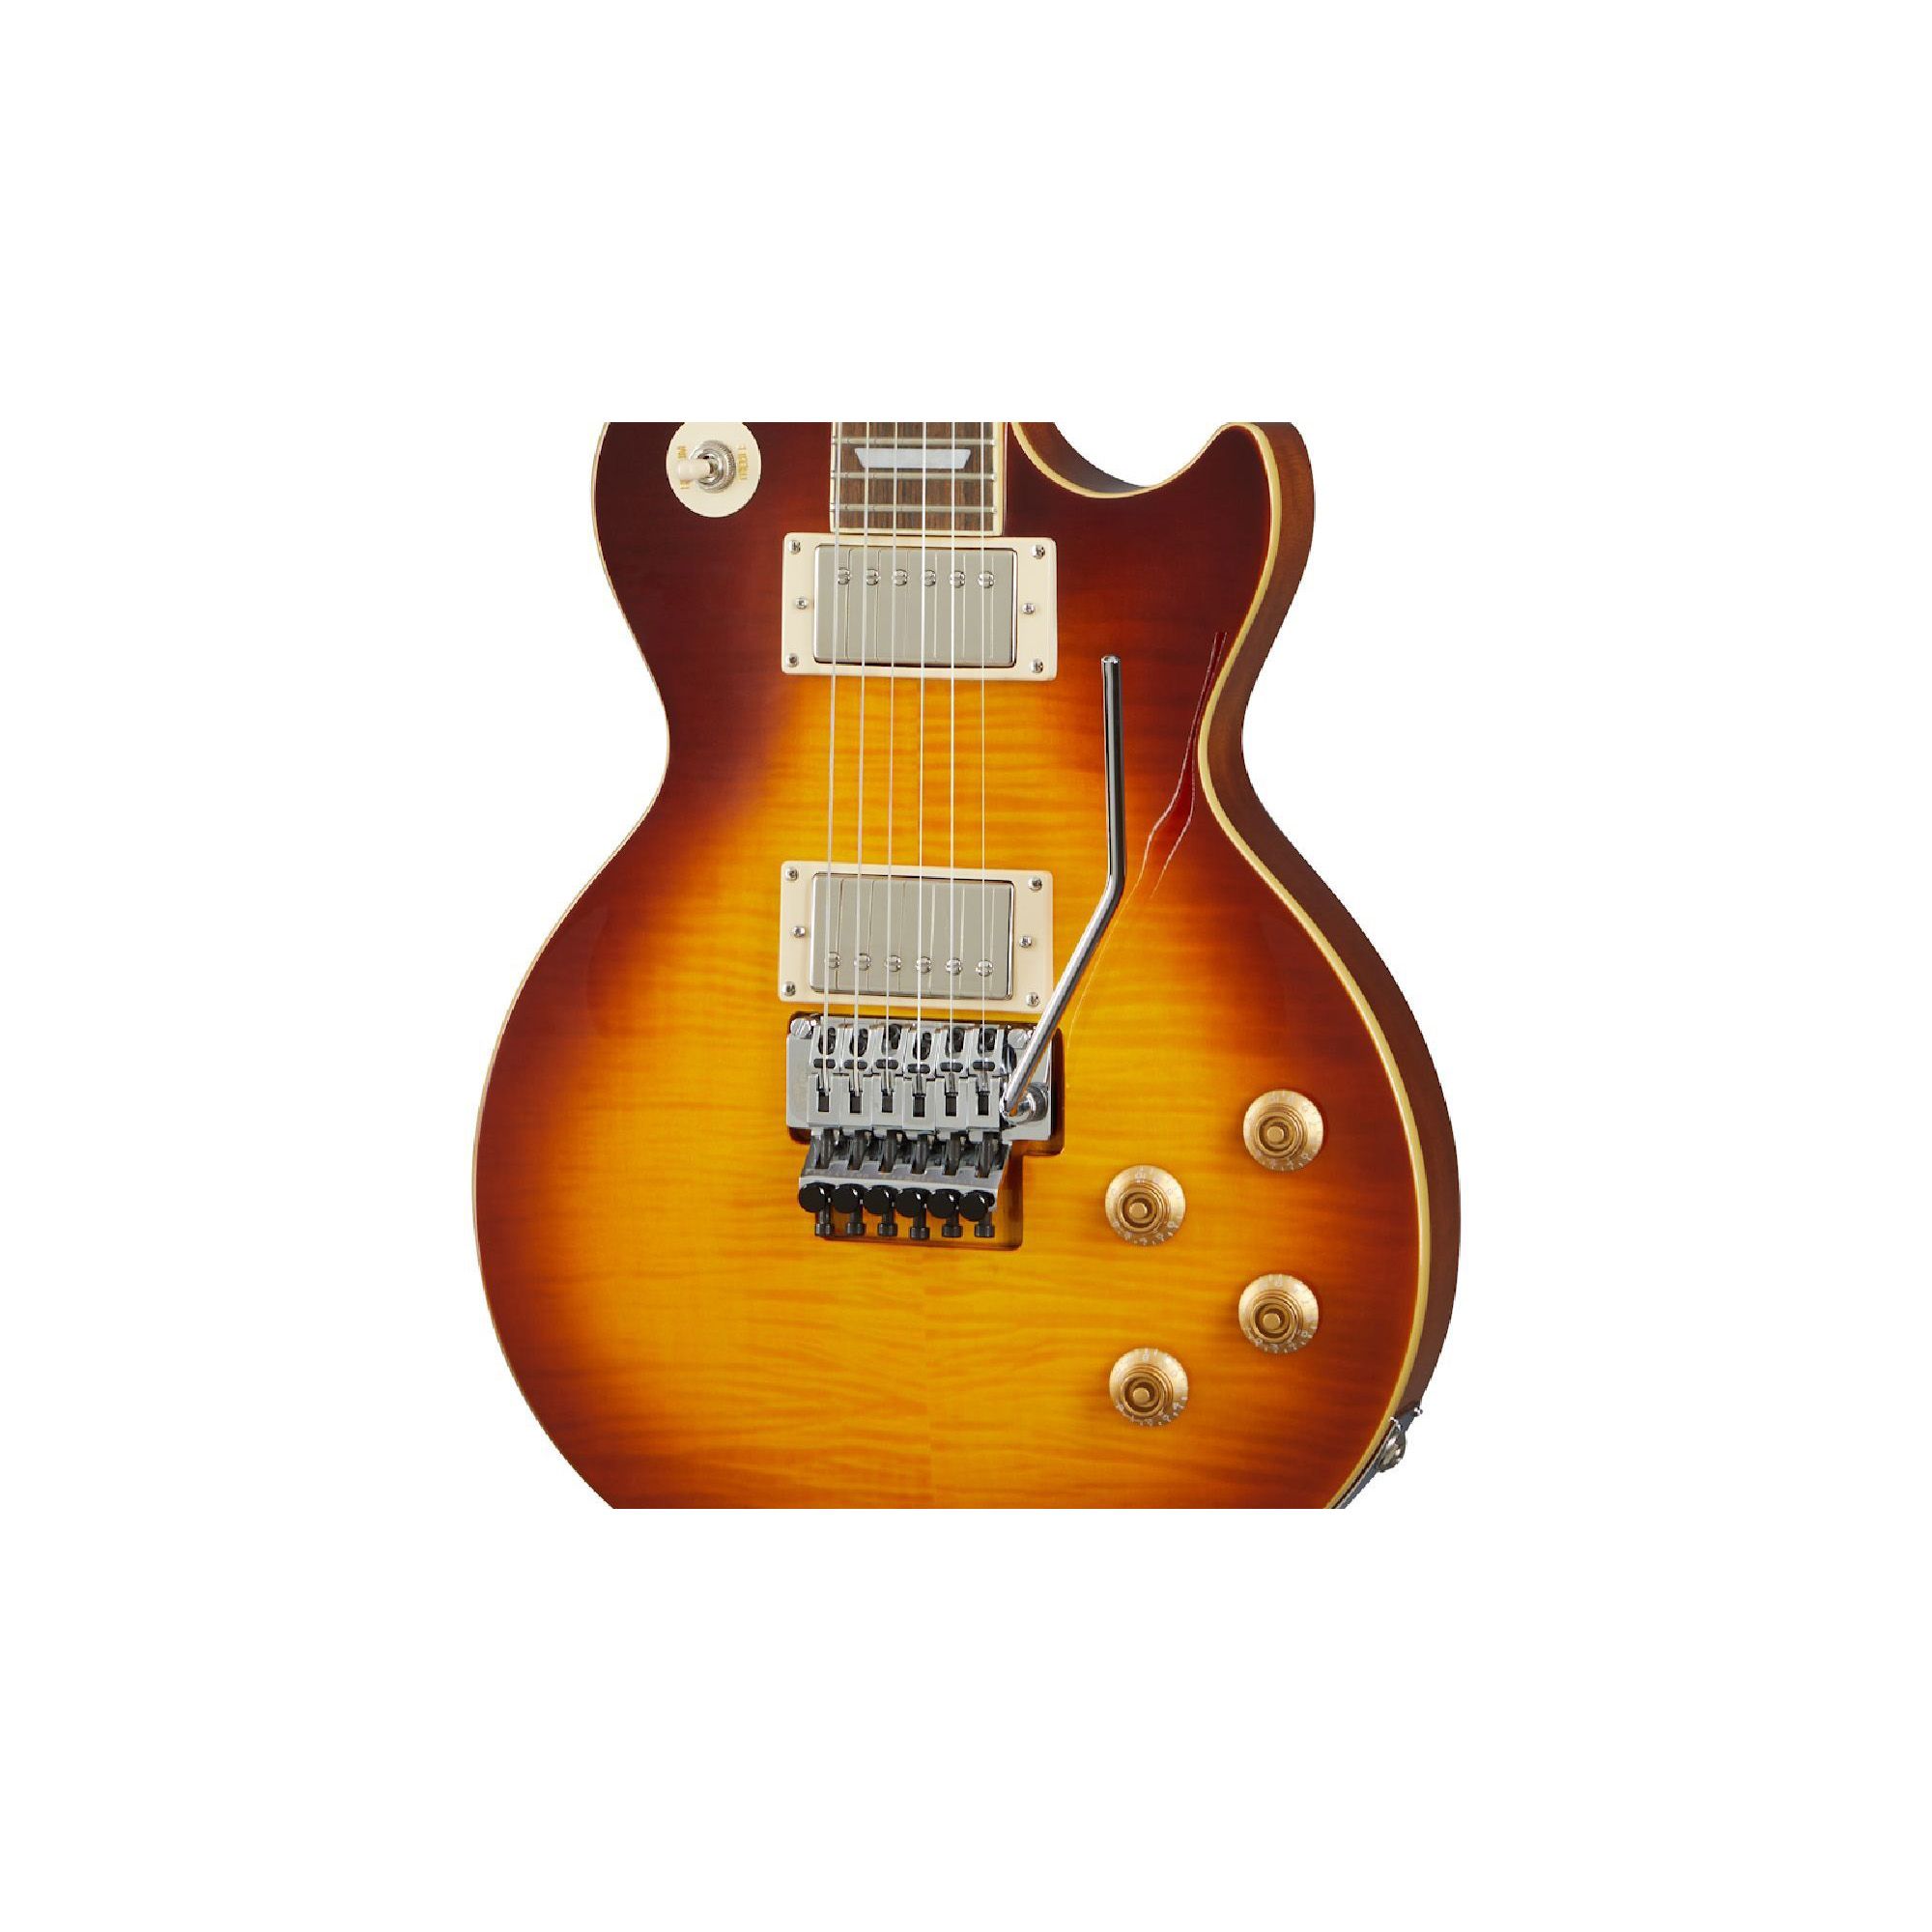 Epiphone Alex Lifeson Les Paul Axcess Standard Viceroy Brown (Incl. EpiLite Case) Электрогитары